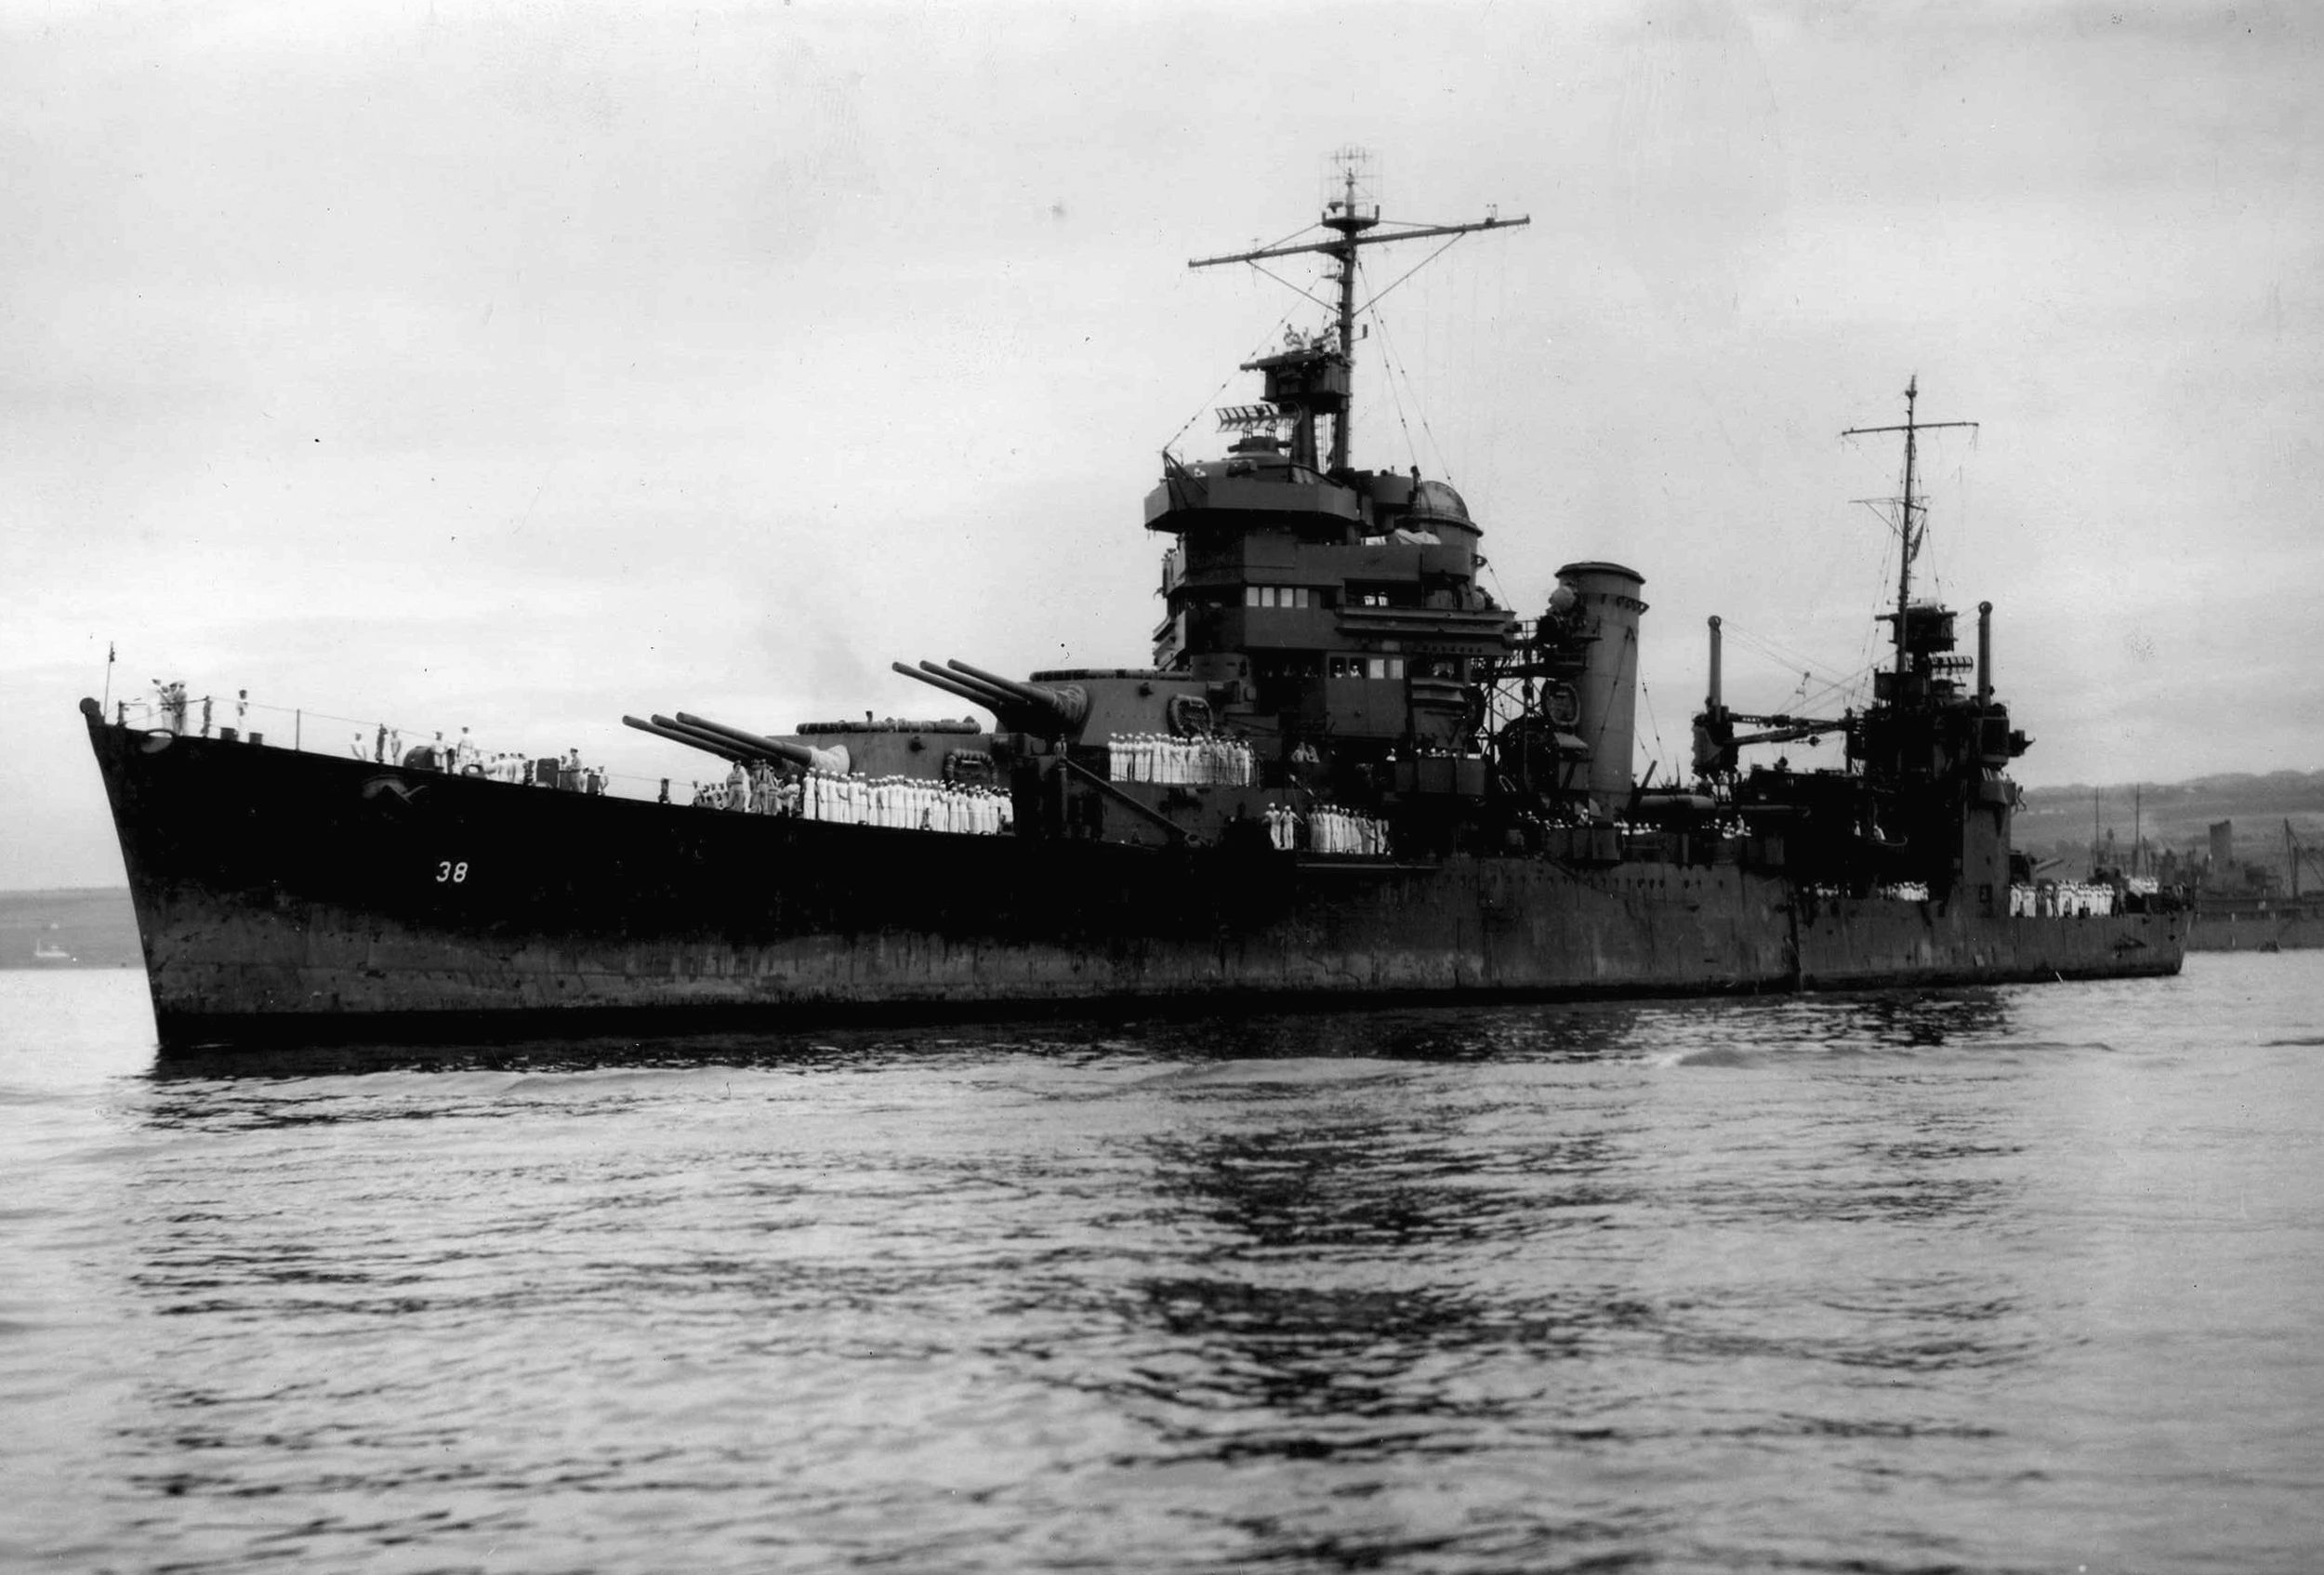 Damaged during the savage naval battles around the island of Guadalcanal, the cruiser USS San Francisco arrives at Pearl Harbor to undergo repairs.